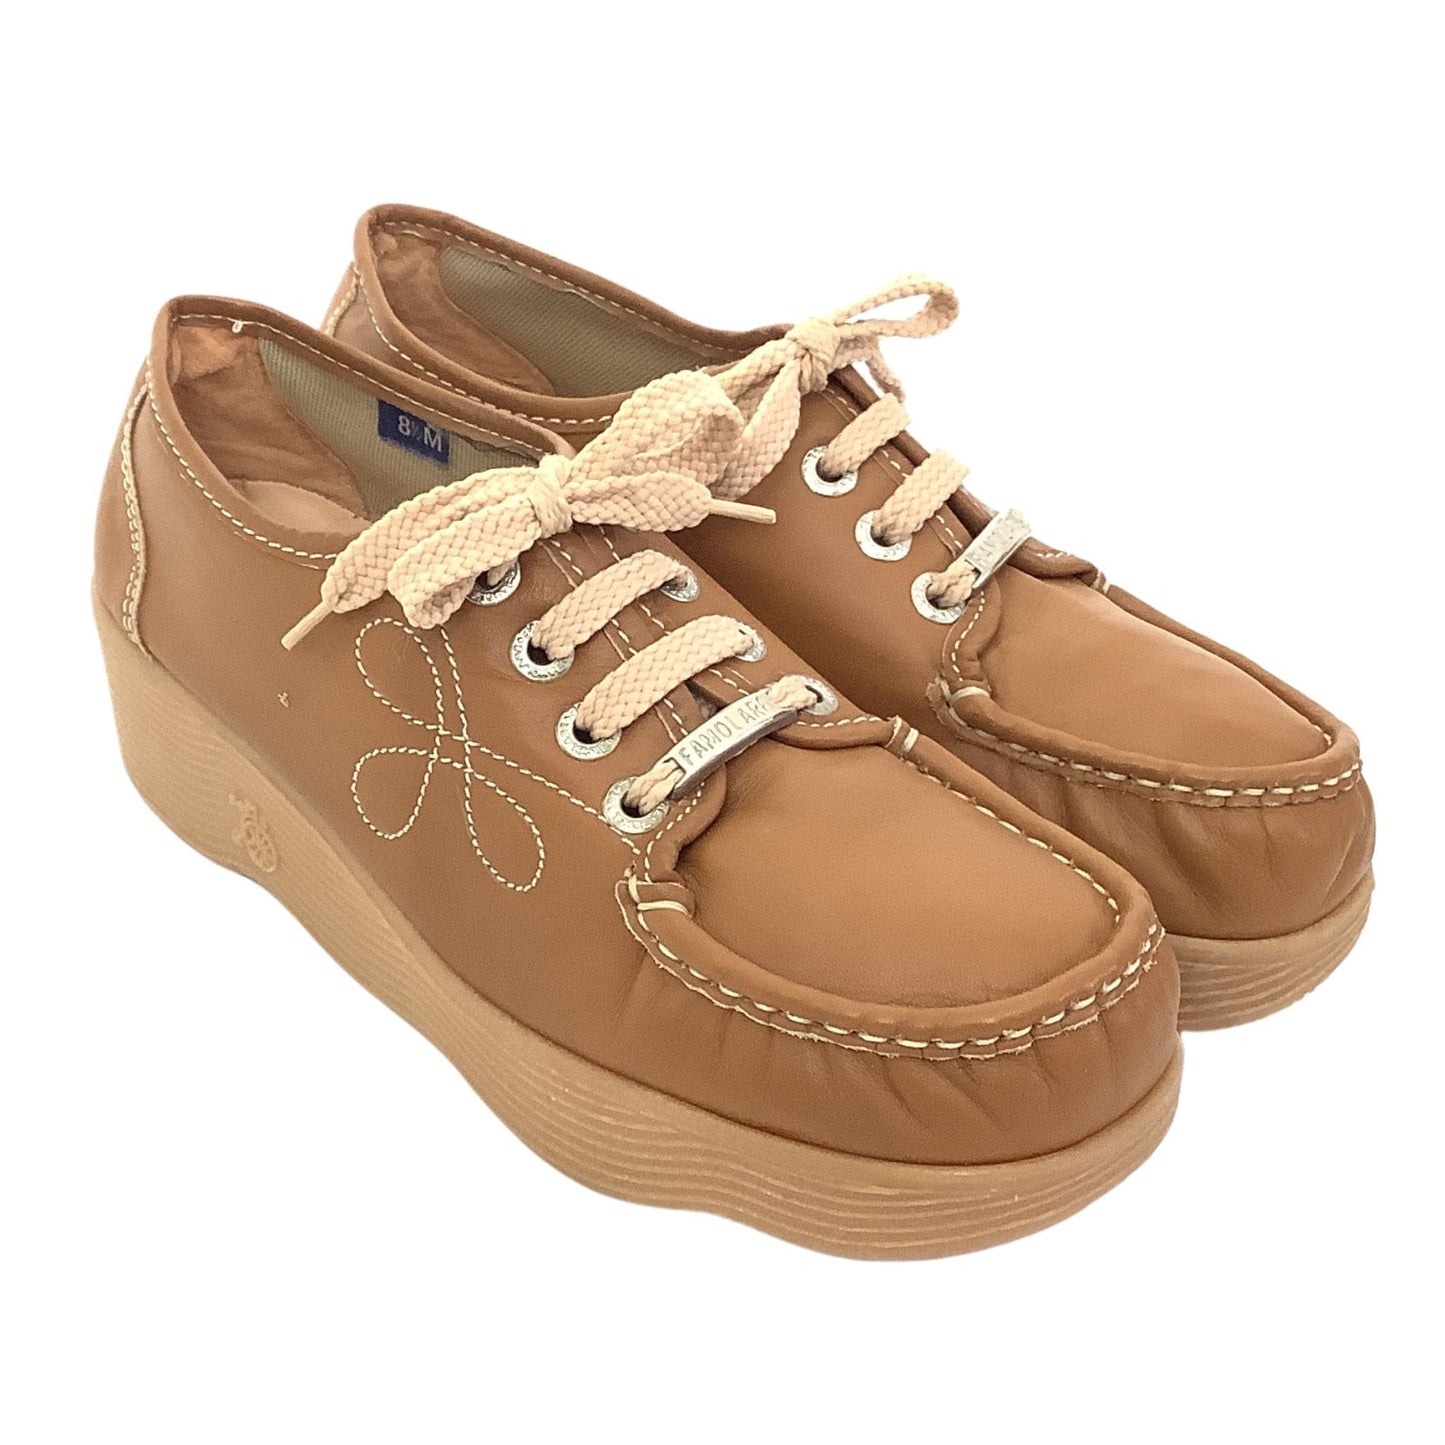 Famolare Get There Shoes 8.5-M / Tan / Mod